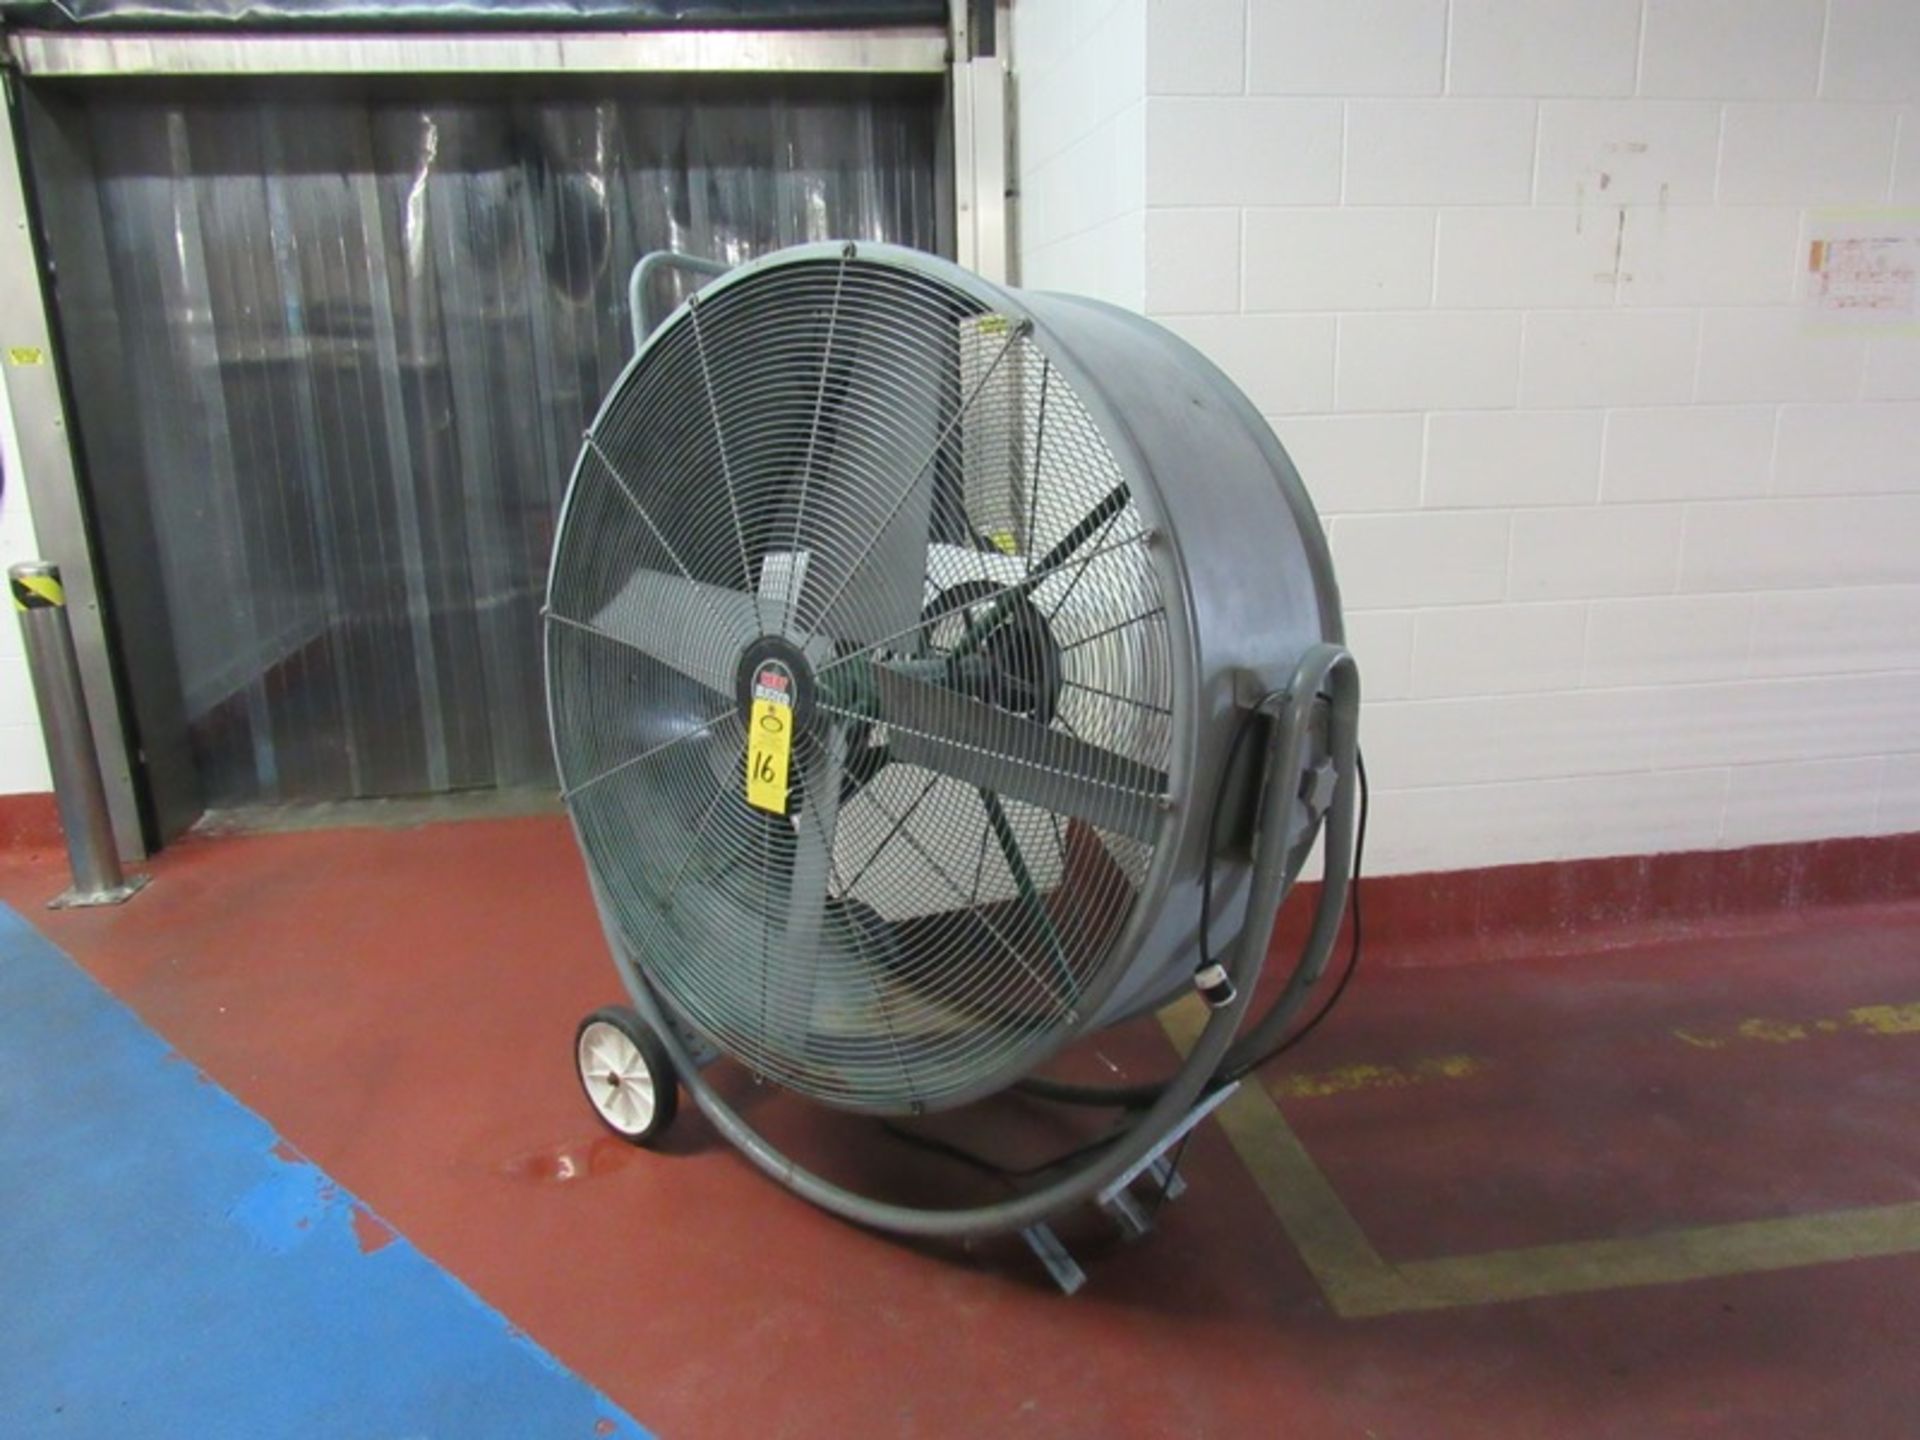 Triangle Mdl. HBD4815 Portable Fan, 48" dia. (Required Loading Fee $15.00 Norm Pavlish 402-540-